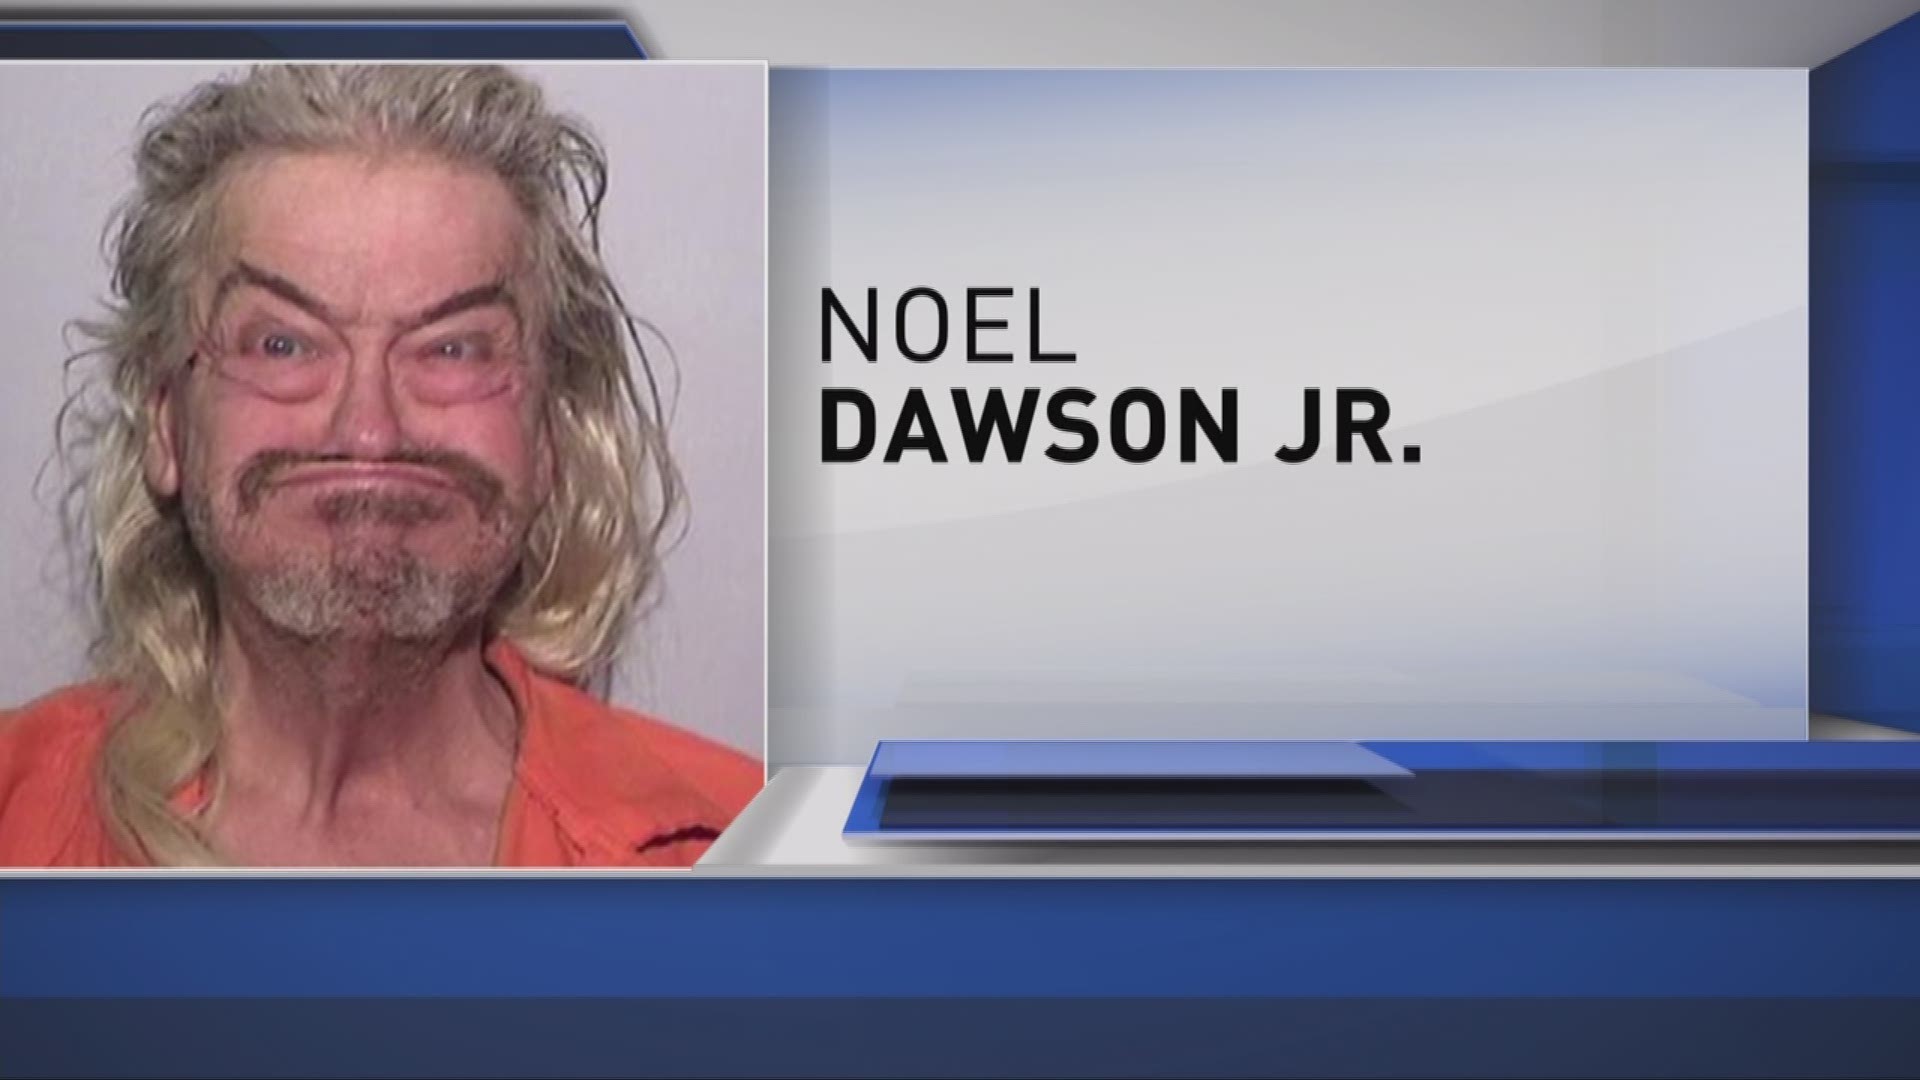 Toledo man arrested after chasing son with hatchet